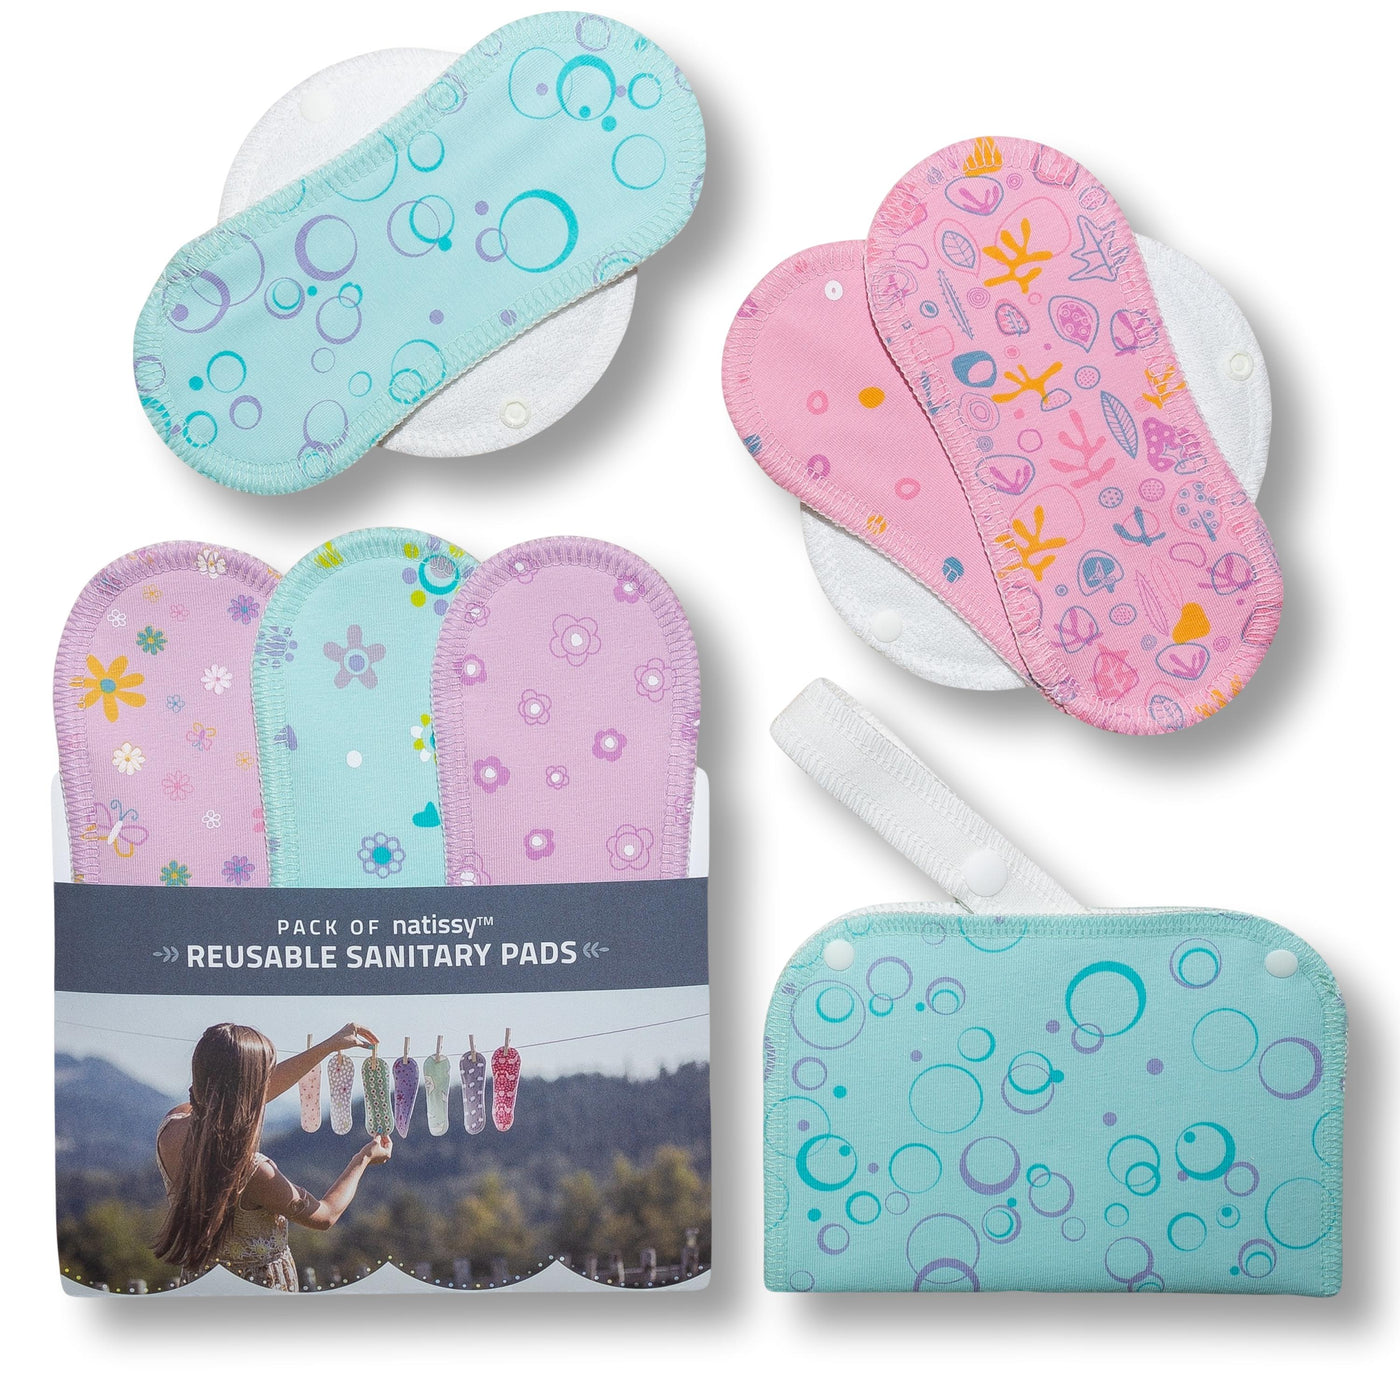 Reusable Menstrual Pads, 6-Pack Cotton Reusable Sanitary Towels with Wings (size S & M), MADE IN EU, for Menstrual Periods and Incontinence; EXTRA Double Wet Bag with Strap; Washable Menstrual Cloth